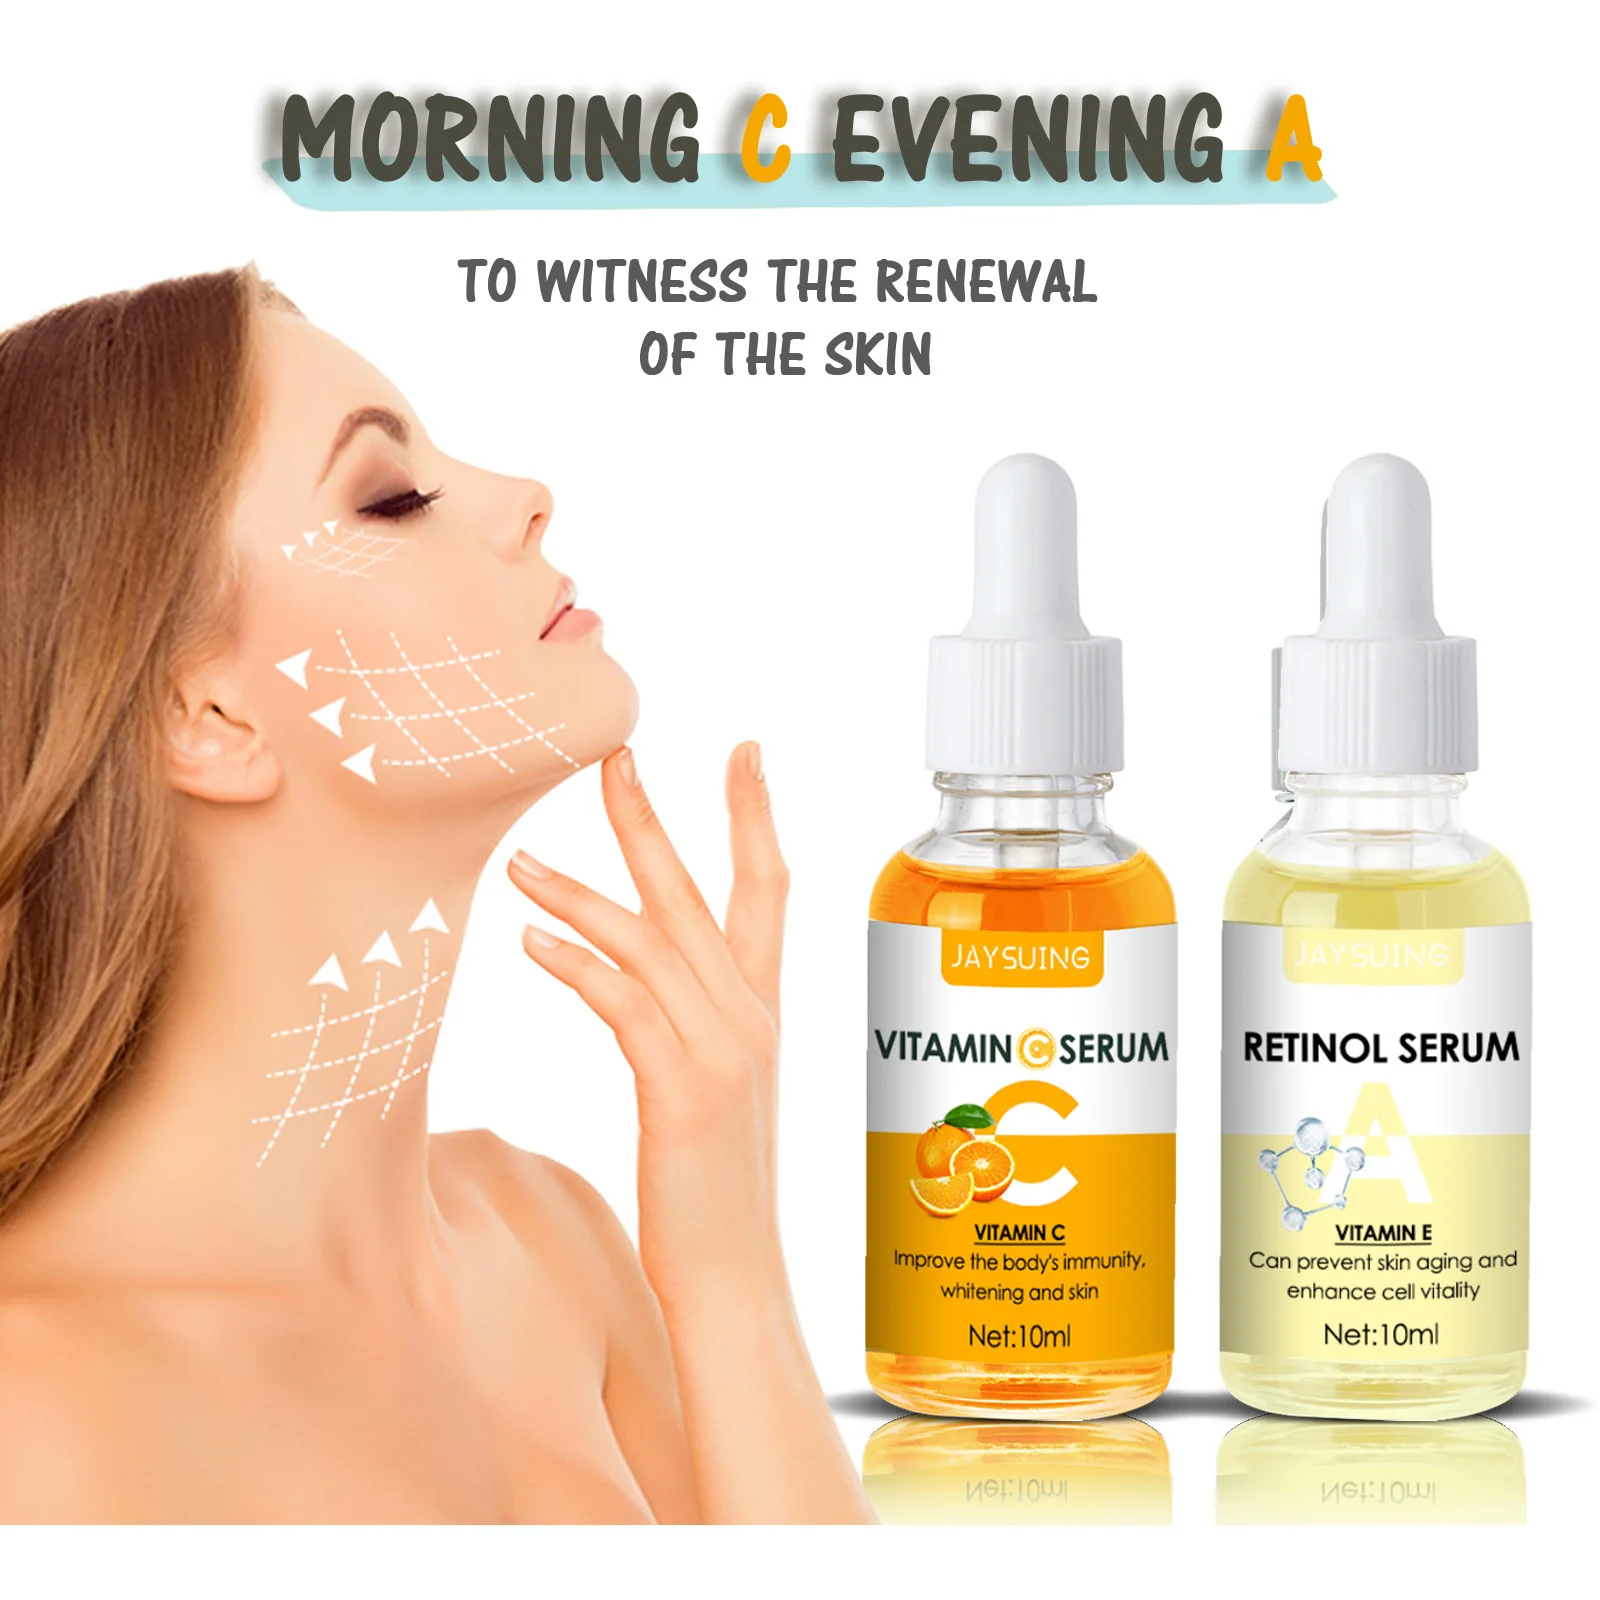 

Jaysuing Early C Late a Essence Brightening and Fading Wrinkles Anti-Aging Firming Skin Dark Yellow Moisturizing Hydrating